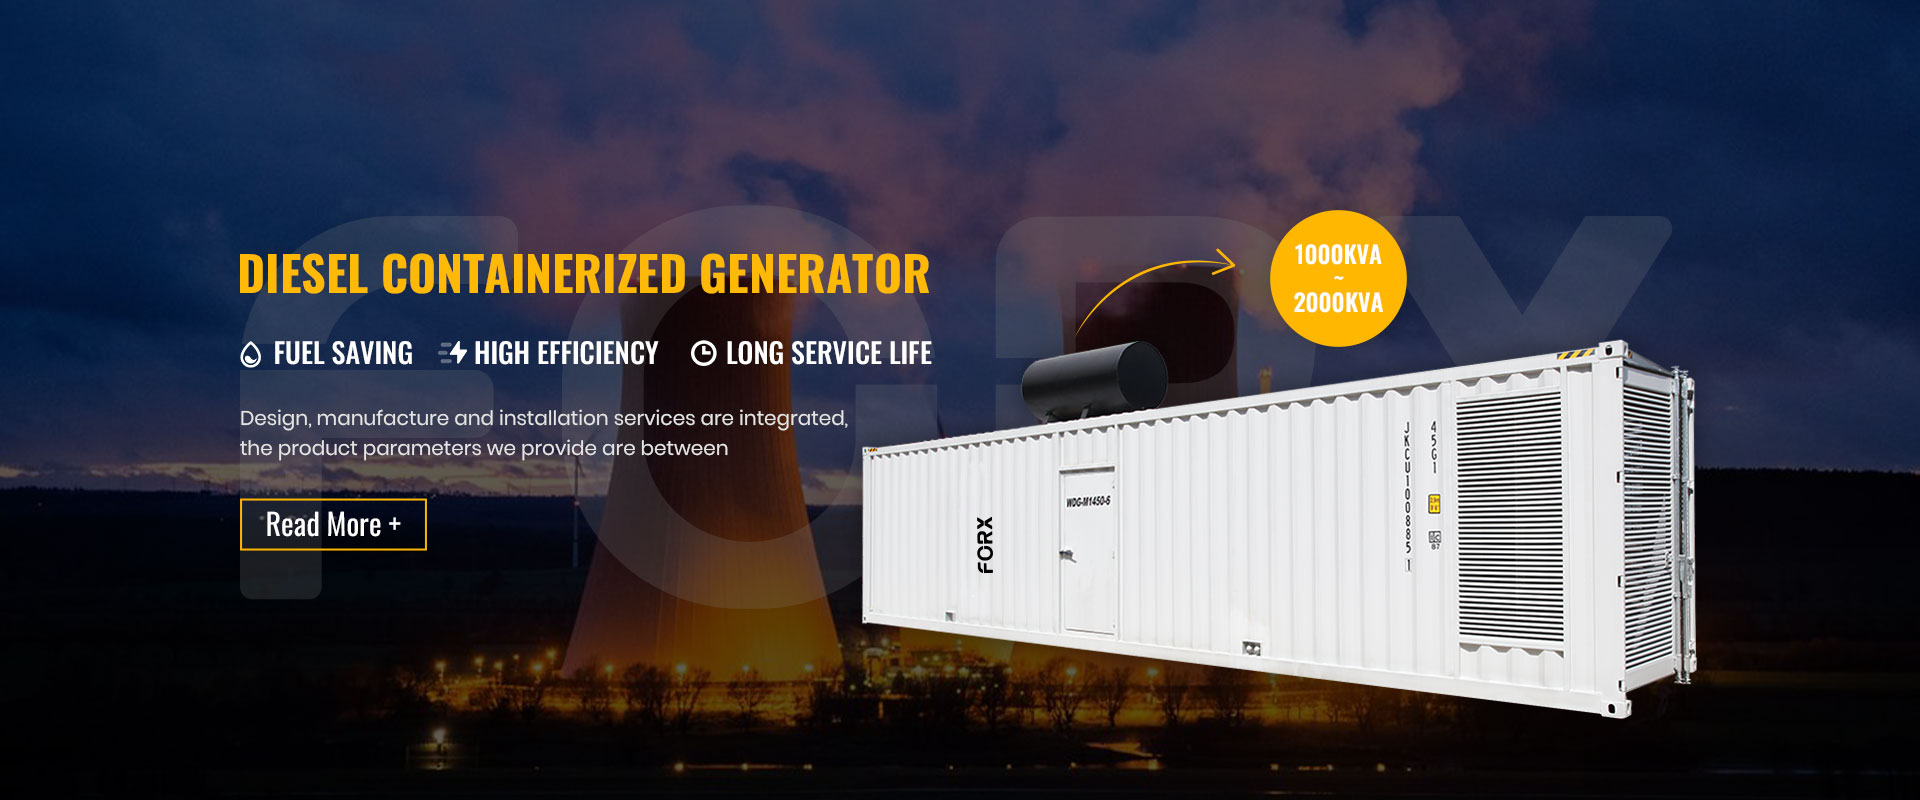 Diesel containerized generator